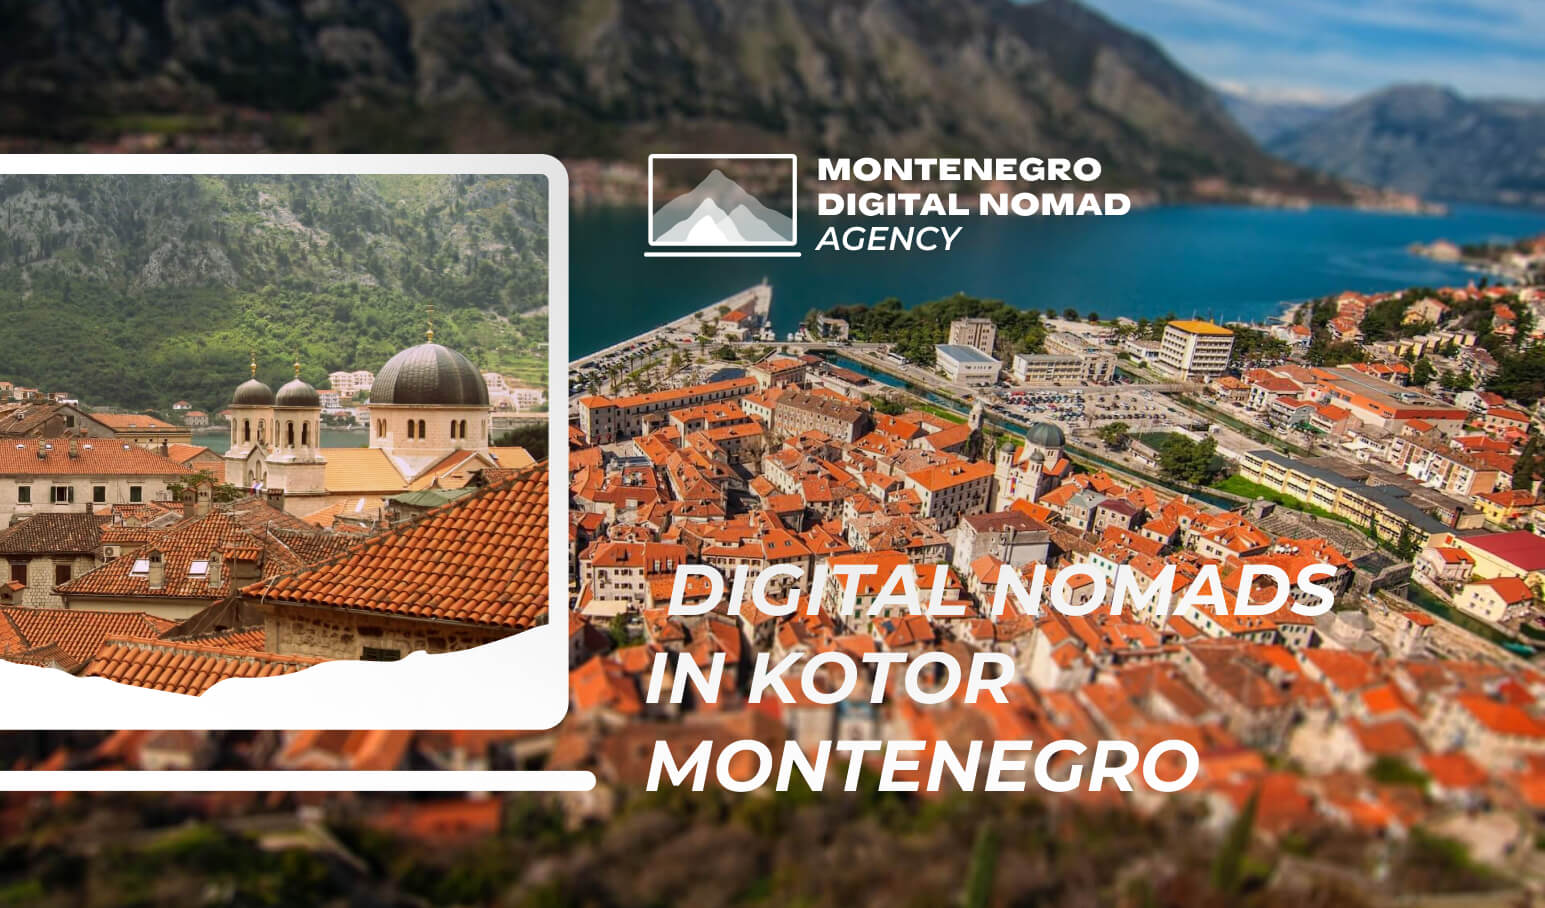 Image of Kotor from the hillside above showing the red tiled rooftops of the old city. Text overlay reads "Digital Nomads in Kotor Montenegro"